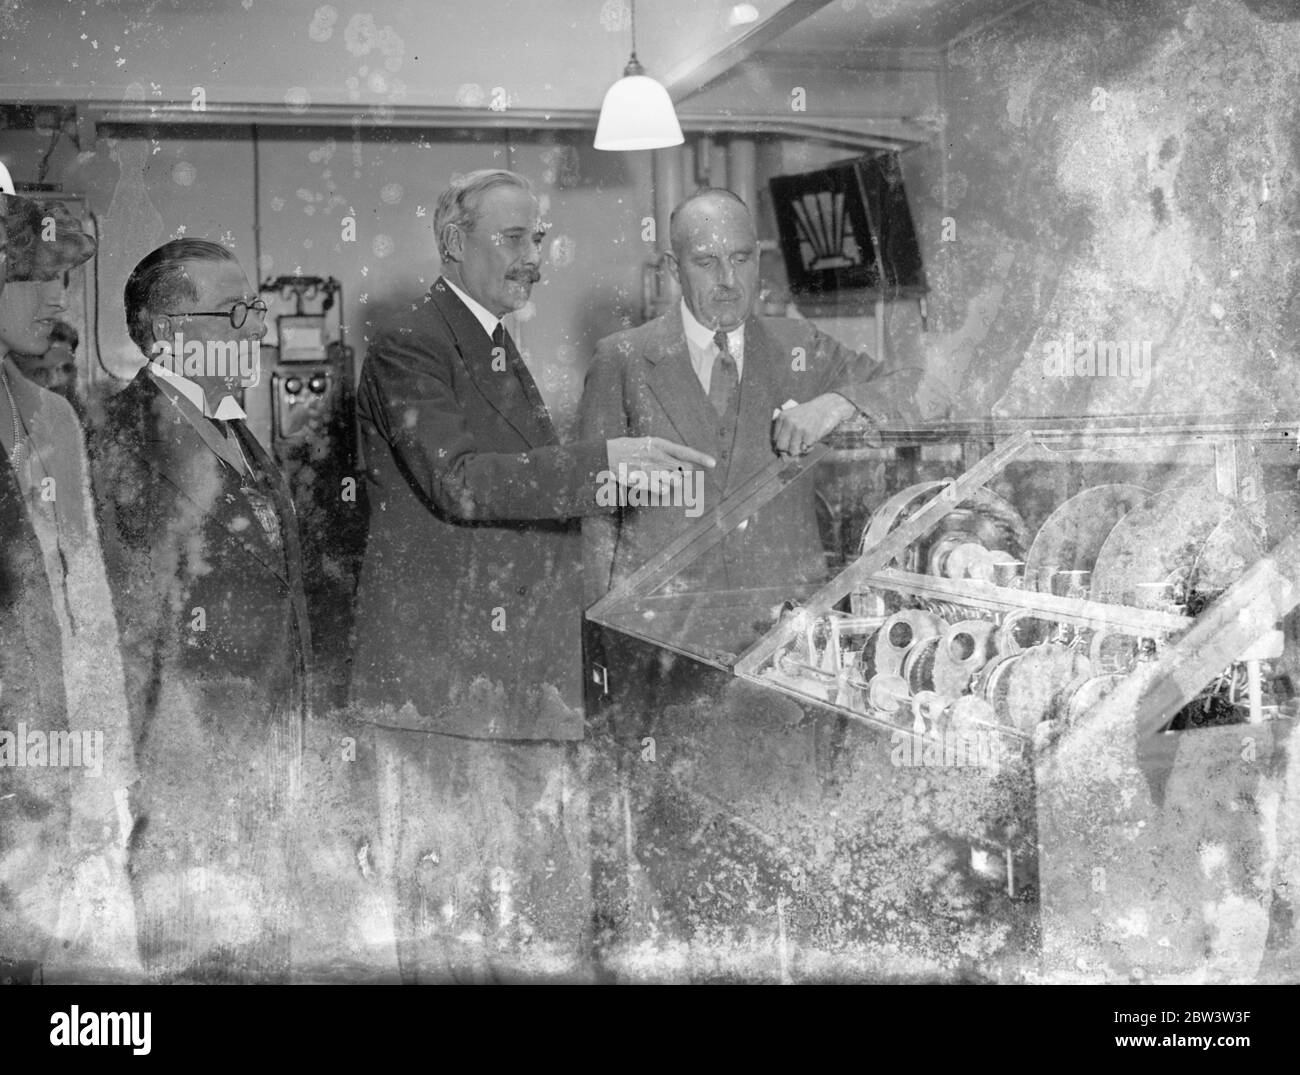 P . M . G . And Astronomer Royal Inaugurate Telephone Talking Clock . The Postmaster - general , Major G . C . Tryon M . P . and the Astronomer Royal , Mr . H . Spencer Jenes , Inaugurated the Talking Clock Service at the Tandem Telephone Exchange building in Holborn . The service is now available to London telephone subscribers who will be able to obtain the time by simply dialling TIM . Photo shows : The Postmaster - general , Major G . C . Tryon , explaining the mechanism of the talking clock to Mr . H . Spencer Jones , Astronomer Royal . 24 Jul 1936 Stock Photo